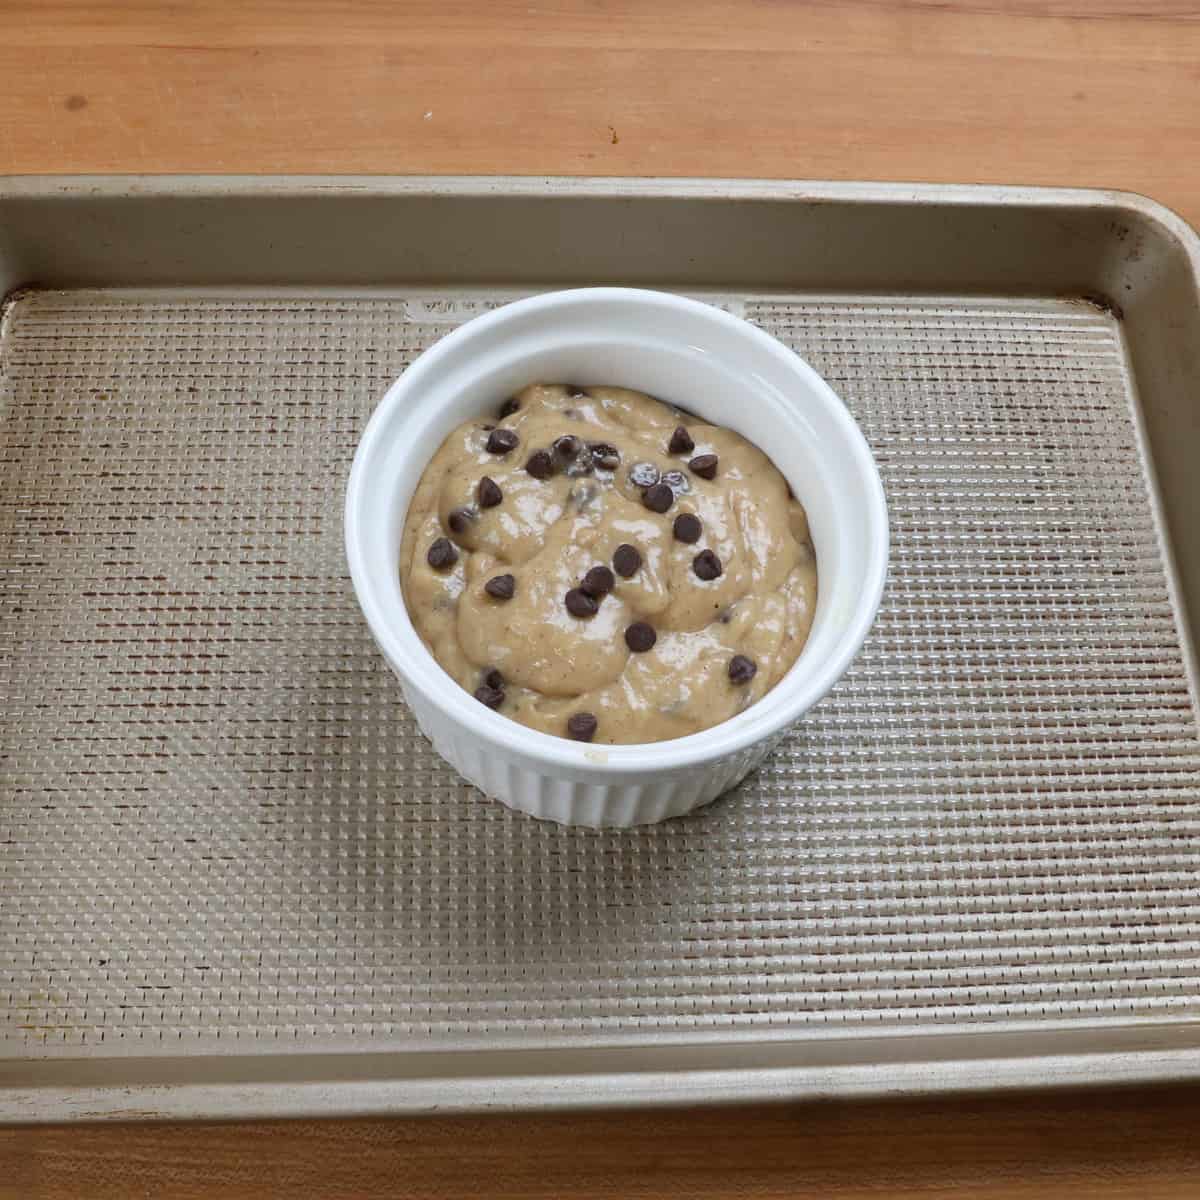 a small unbaked chocolate chip banana bread in a white ramekin on a baking sheet.